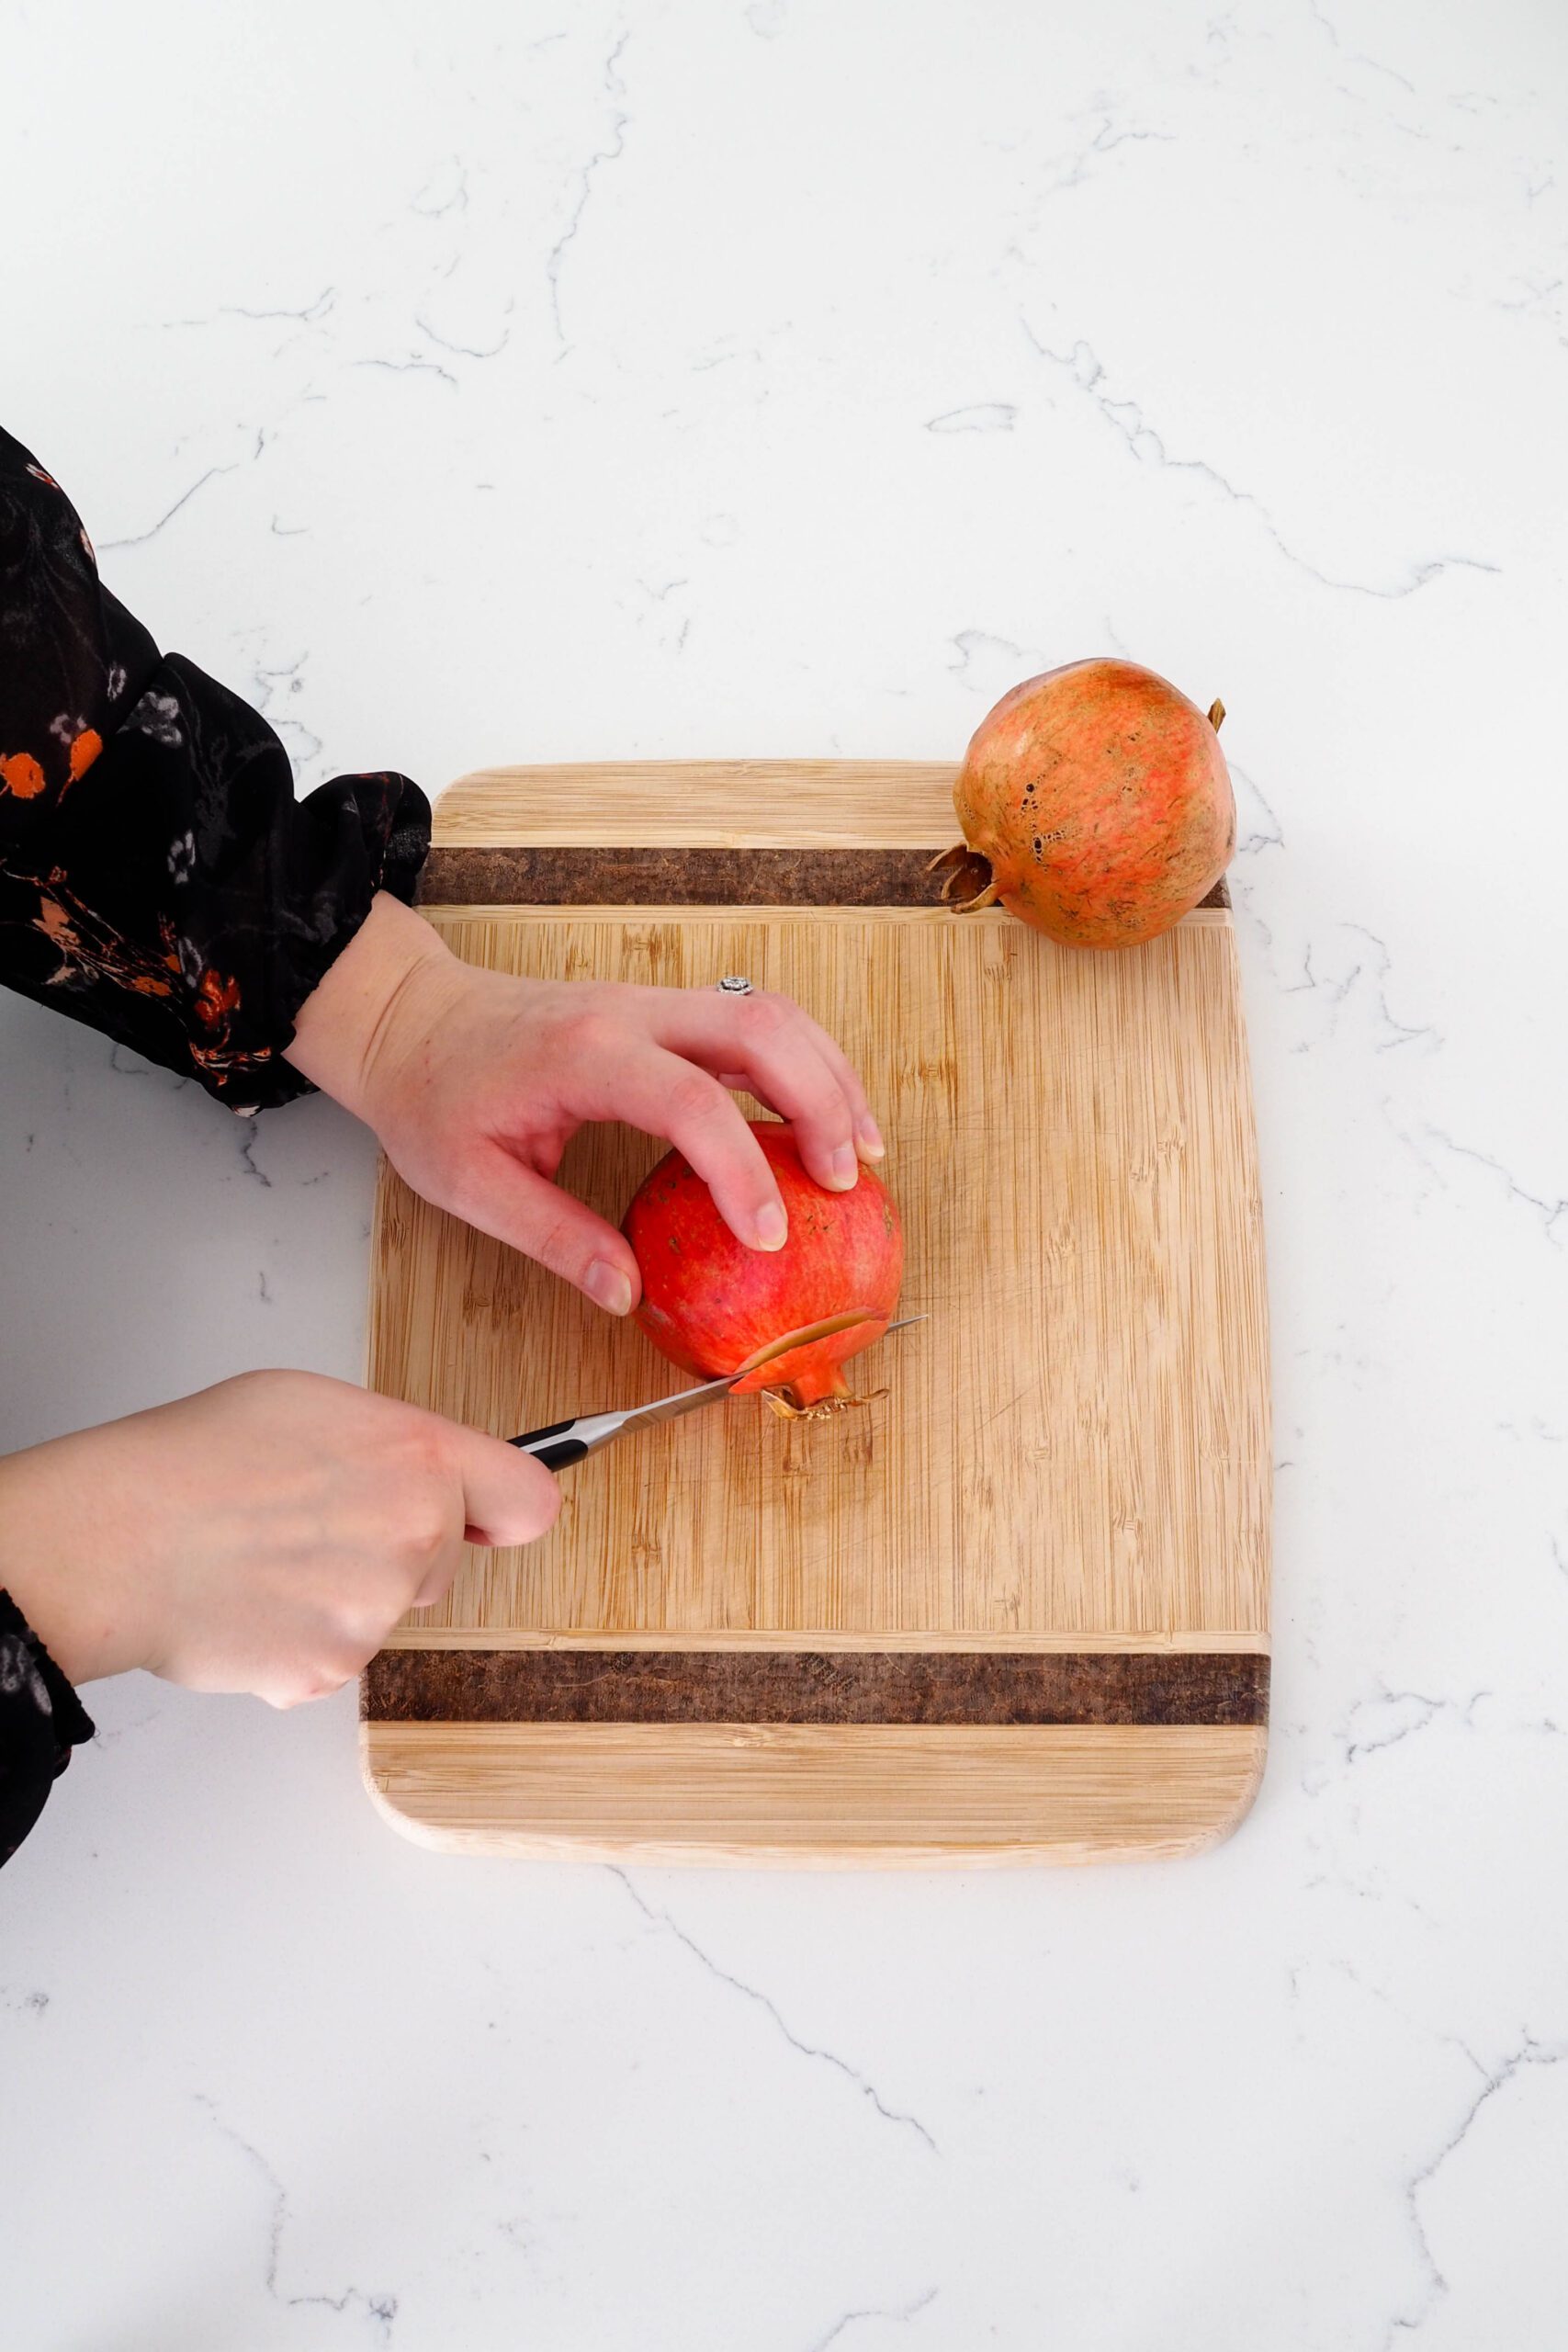 The crown of a pomegranate is being sliced off on a cutting board with a paring knife.